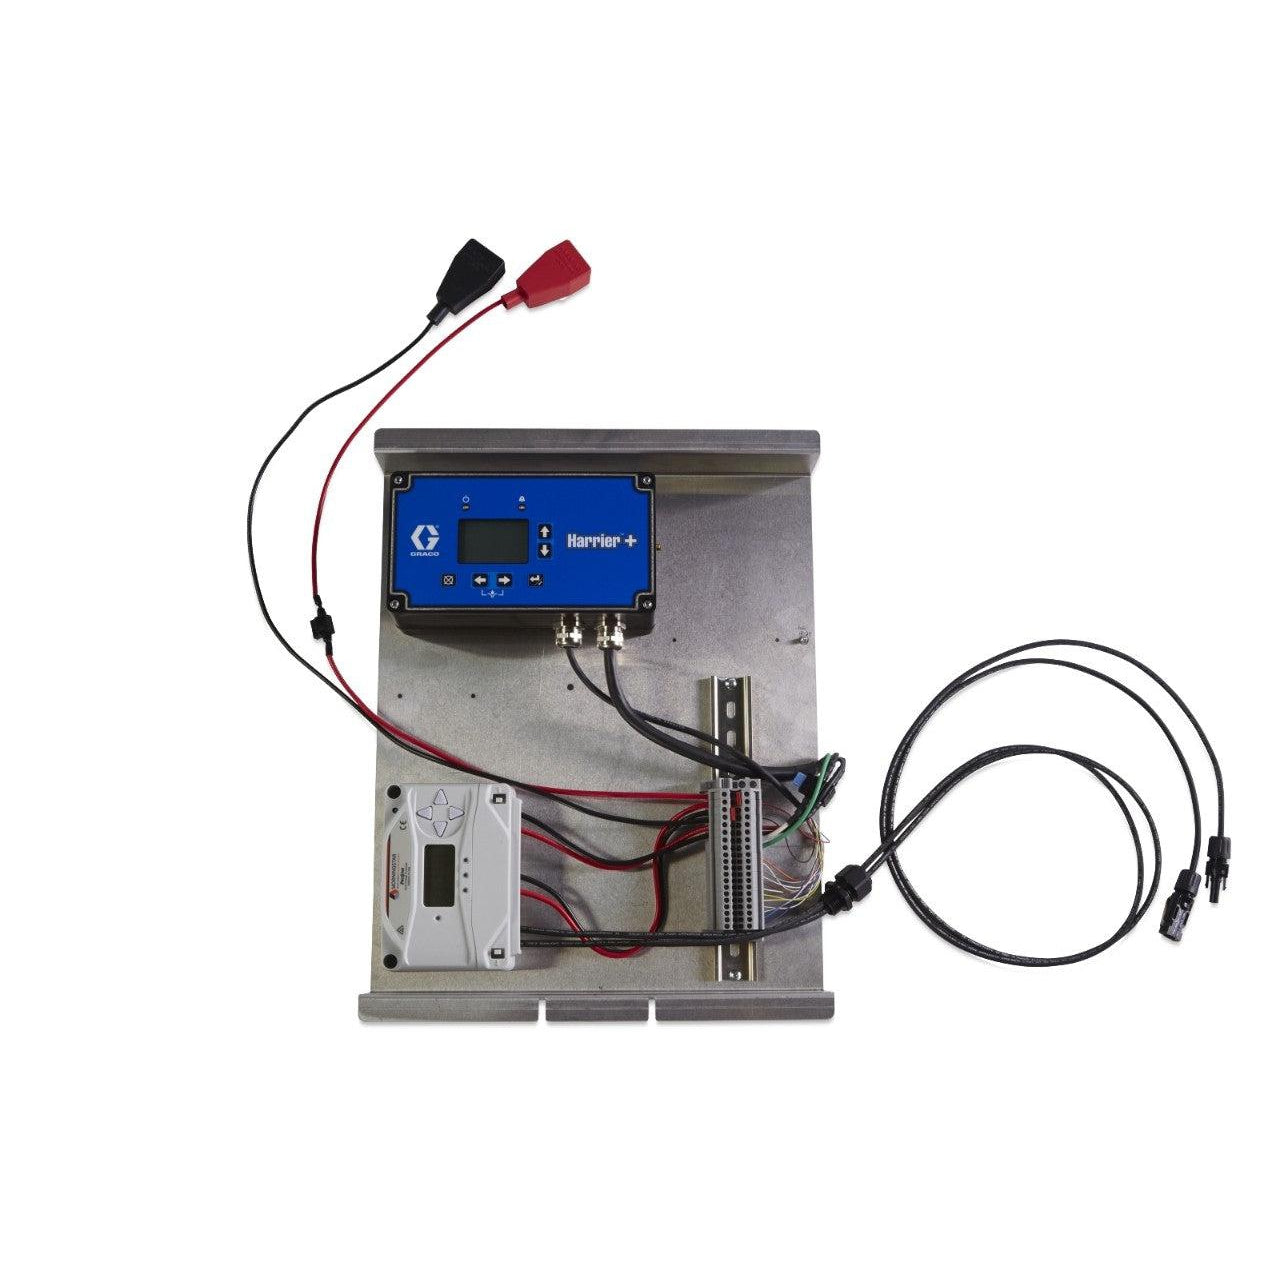 Four-Battery Control Box with Harrier+ International Controller and Includes Prostar 30 Three Panel Charge Controller